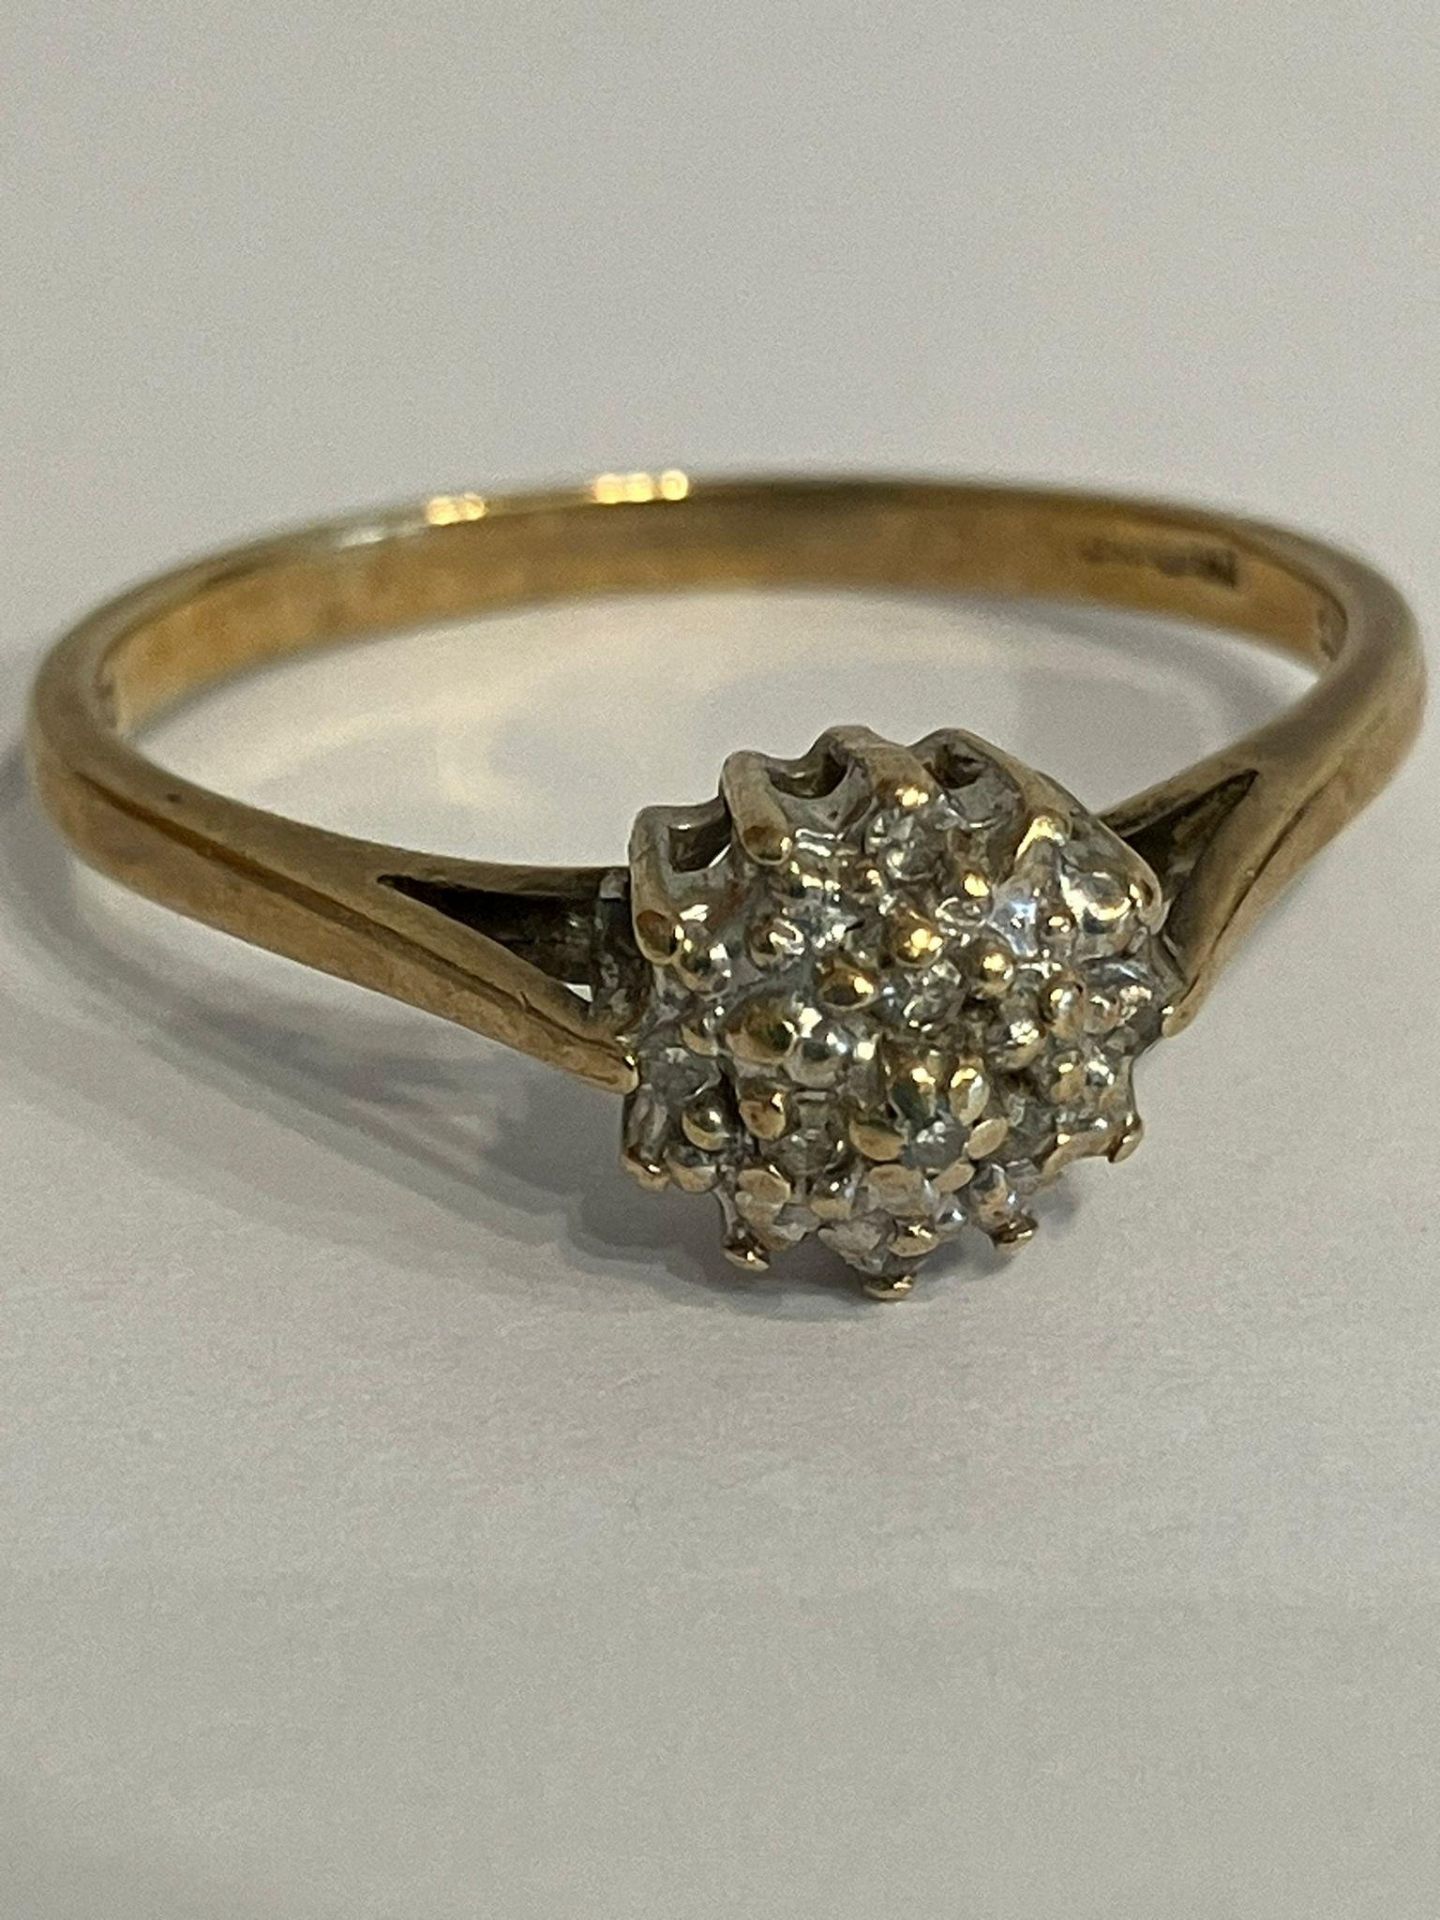 9 carat YELLOW GOLD and DIAMOND CLUSTER RING. Complete with ring box. Full UK hallmark.1.85 grams. - Image 2 of 2